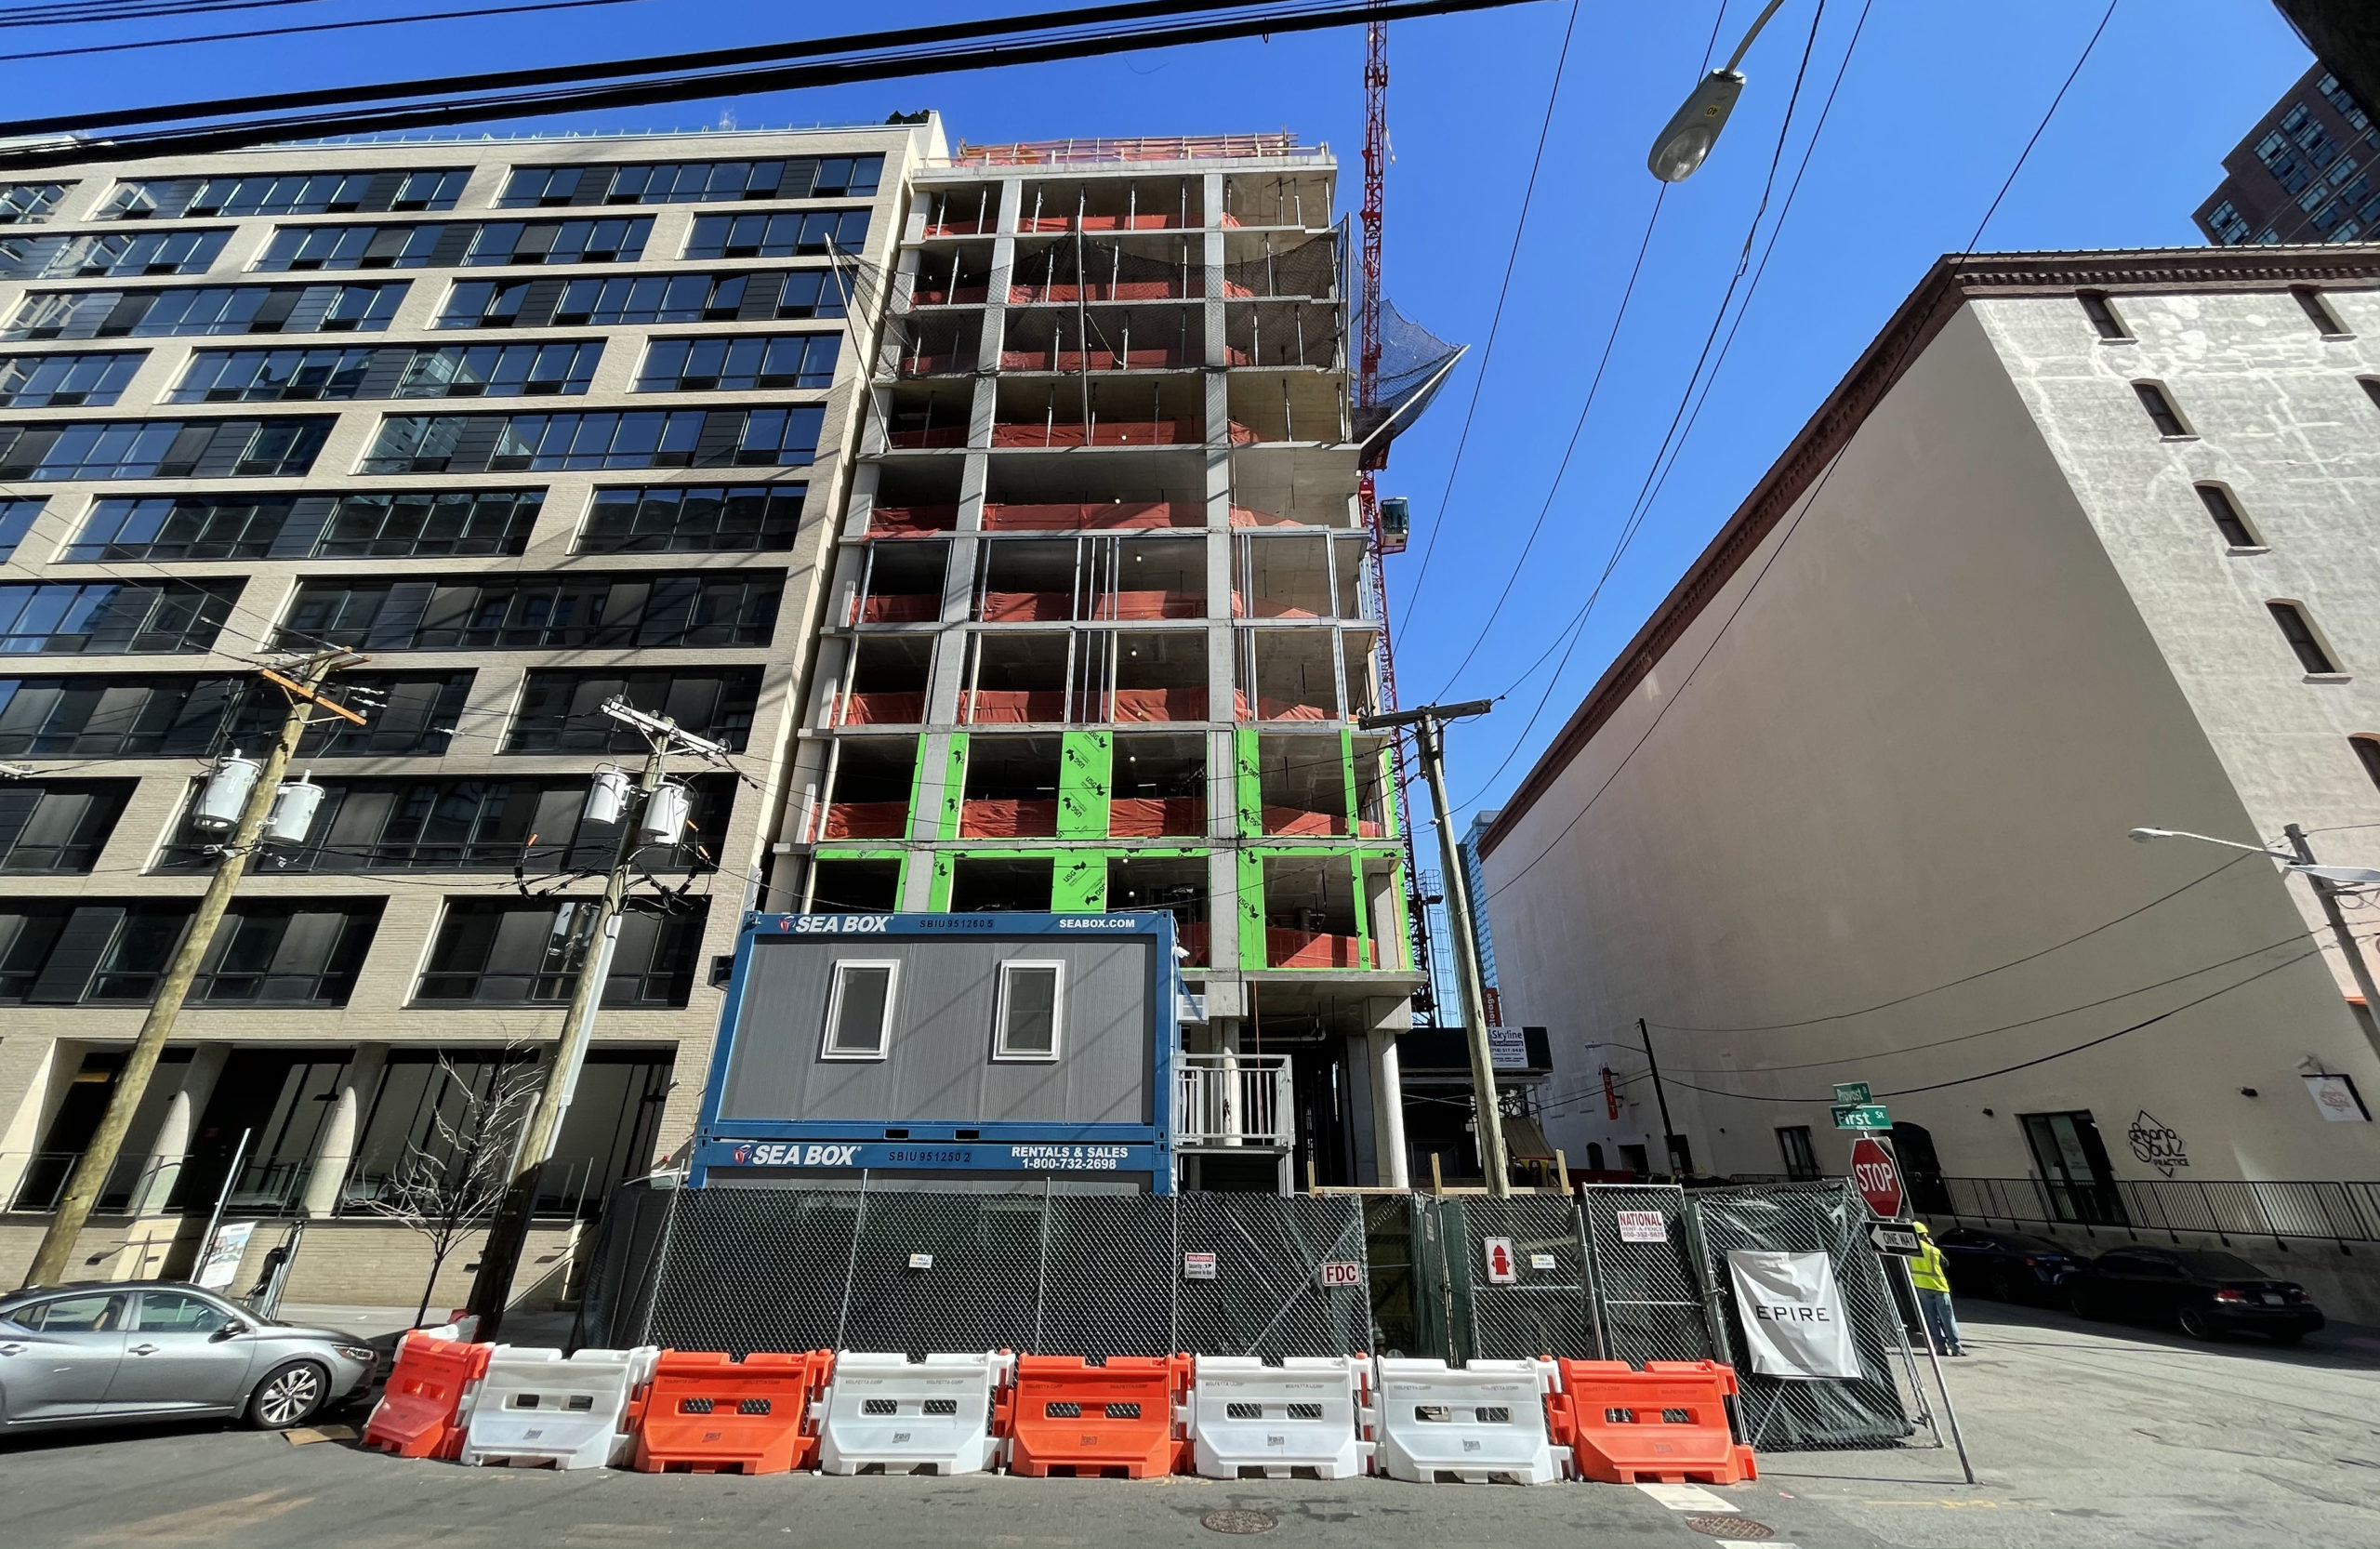 144 First Street Reaches 12-Story Pinnacle in Jersey City, New Jersey - New York YIMBY